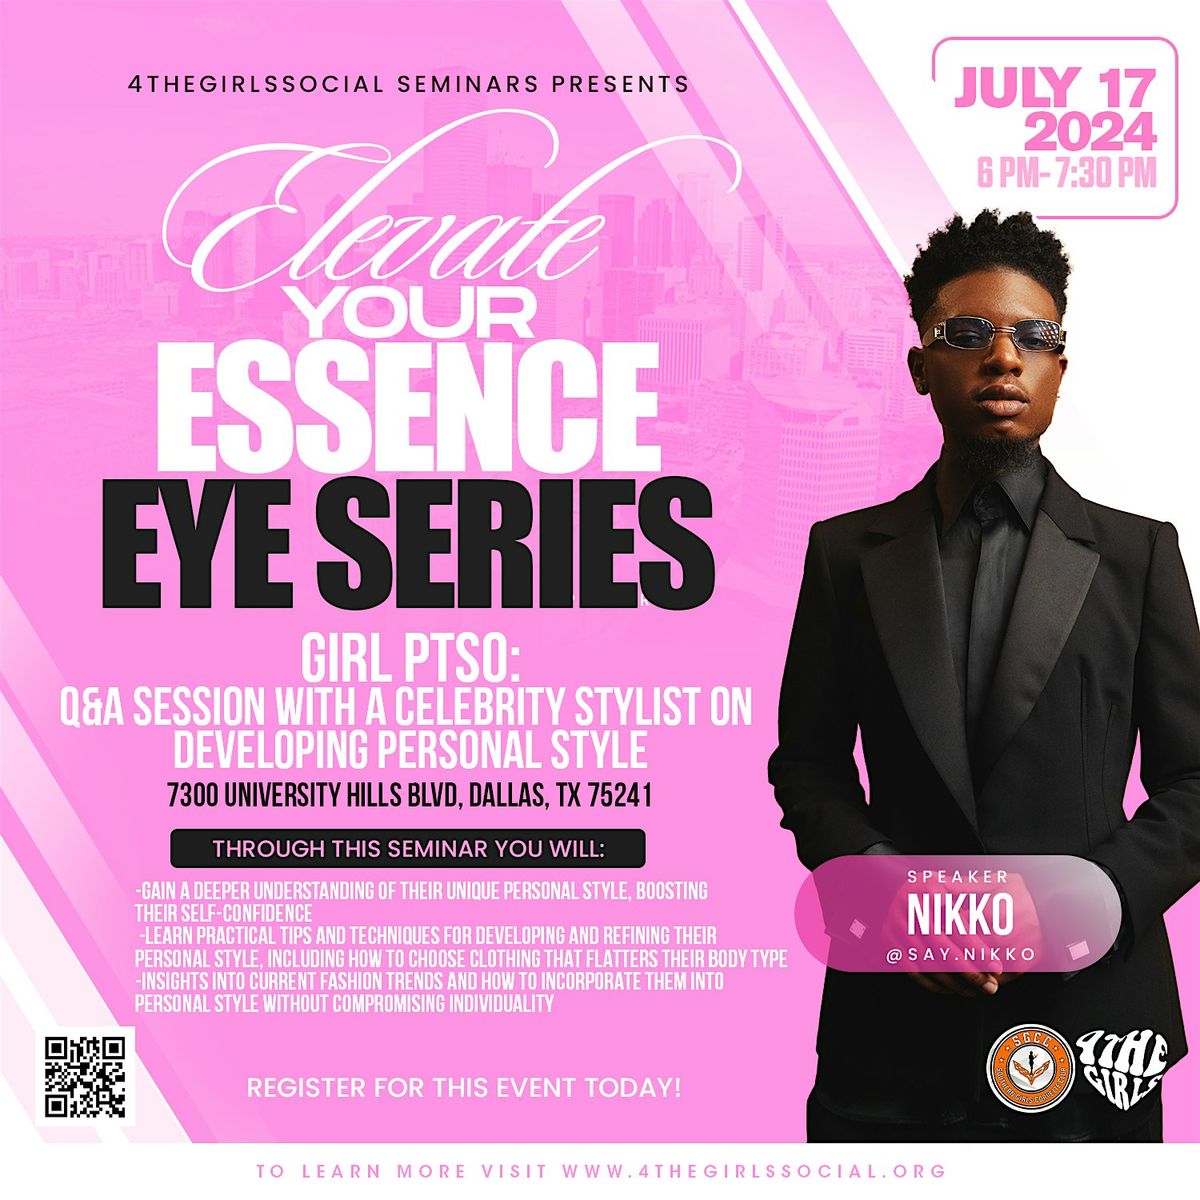 Elevate Your Essence: Girl PTSO Q&A Session with a Celebrity Stylist